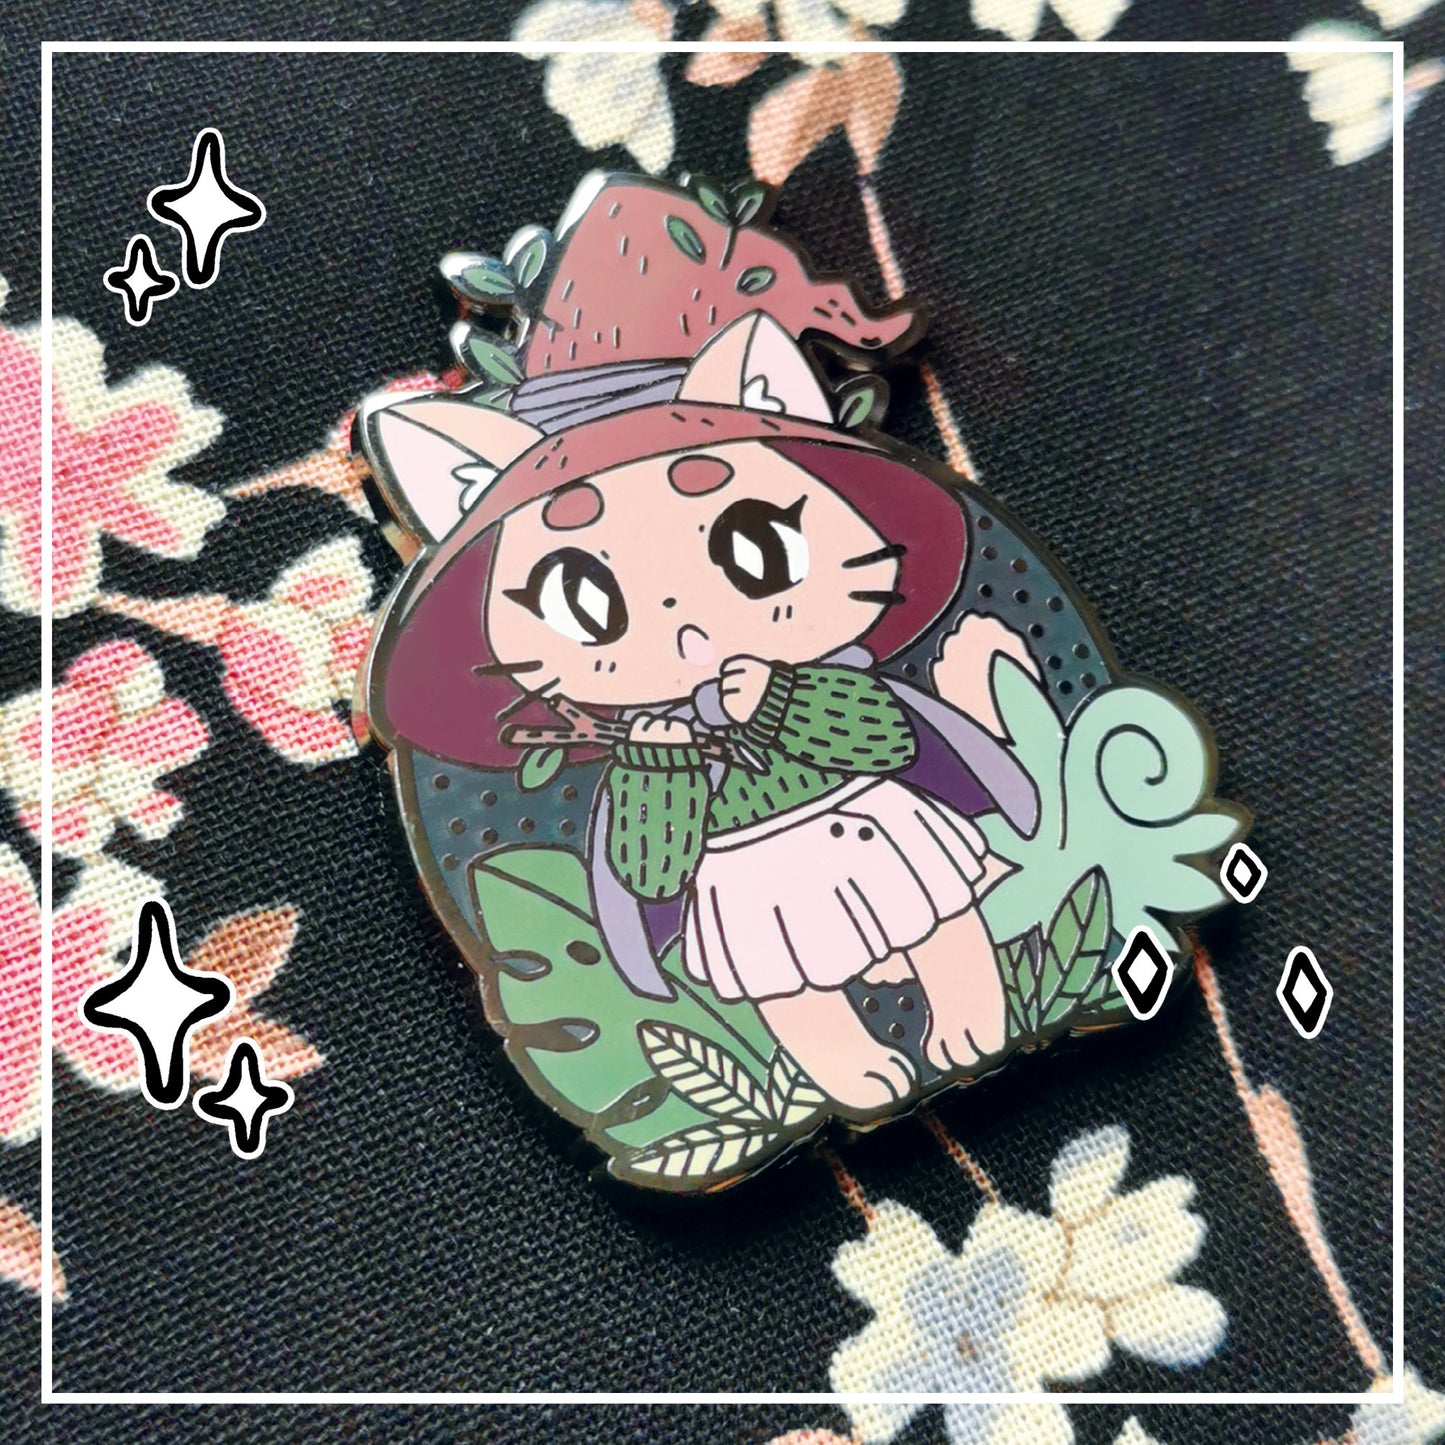 Myuna's Plant Witch Pin - Little Witch Acatemia Cat Witch Pins - Cute Cat Witch Green Thumb talismans, Kawaii Witchy Occult Hard Enamel Pins